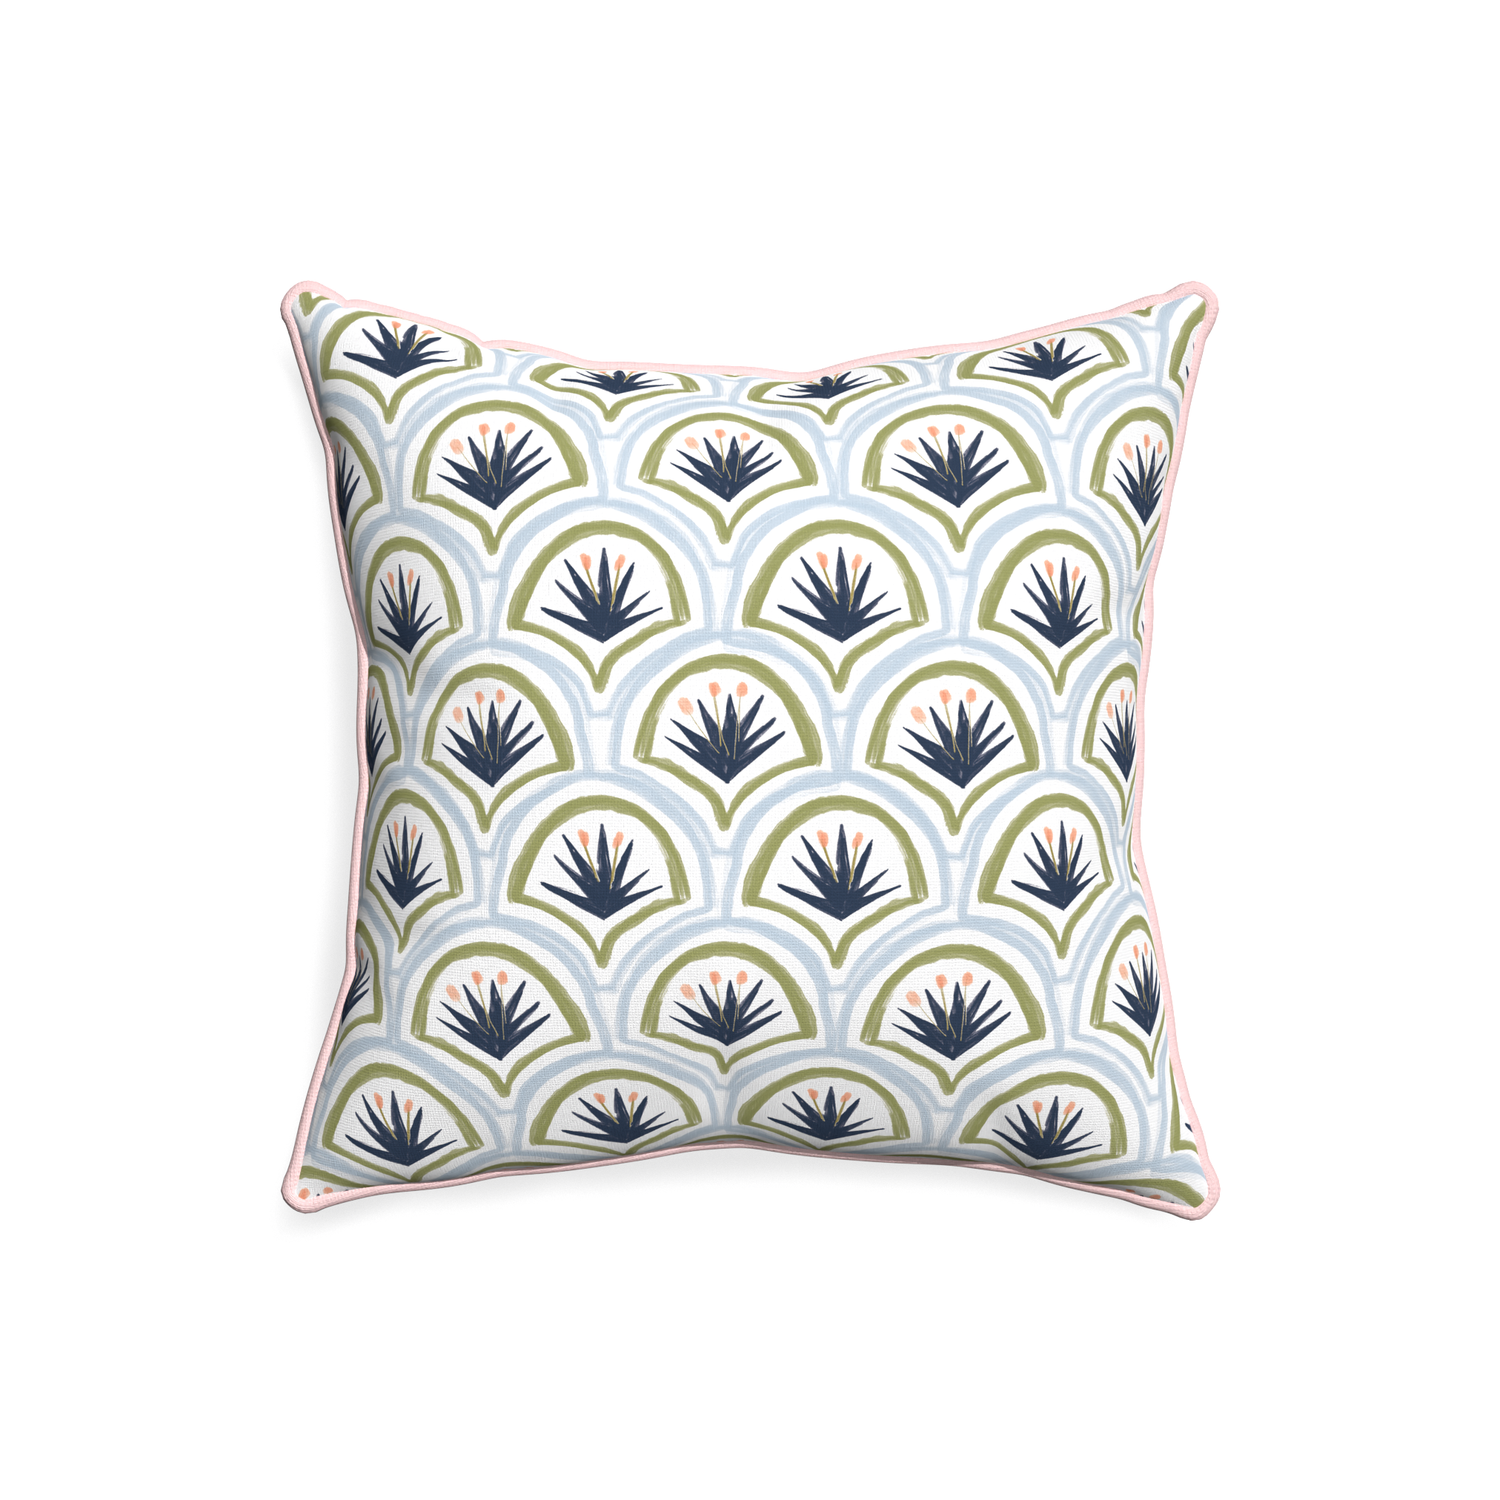 20-square thatcher midnight custom art deco palm patternpillow with petal piping on white background